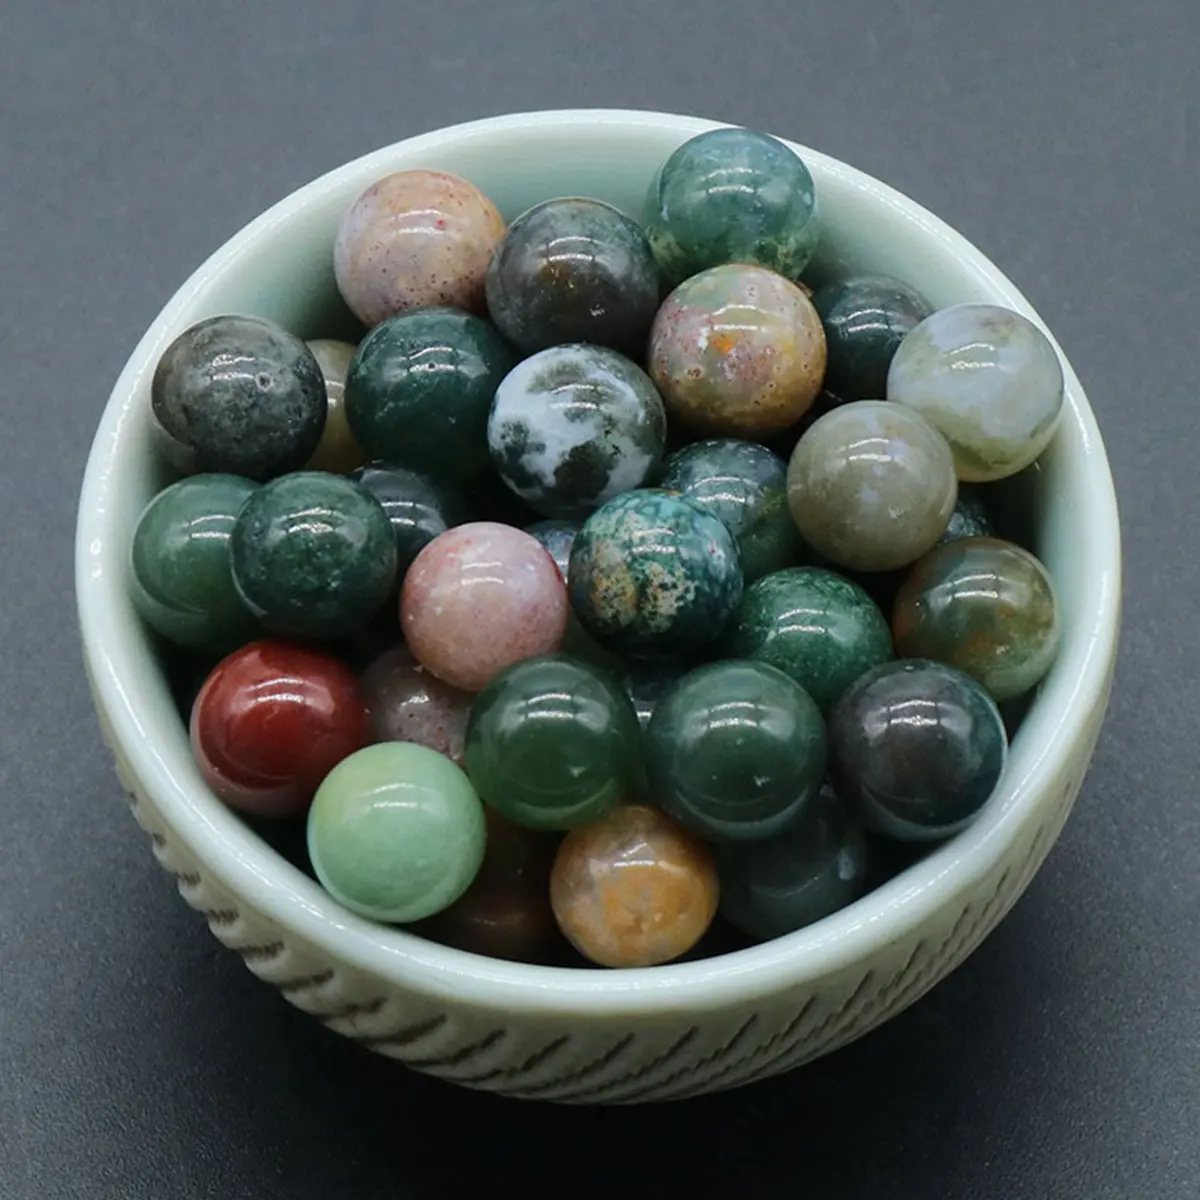 

8PCS 8MM Moss Agate Round Beads for DIY Making Jewelry NO-Drilled Hole Loose Healing Cute Stone Crystal Sphere Balls